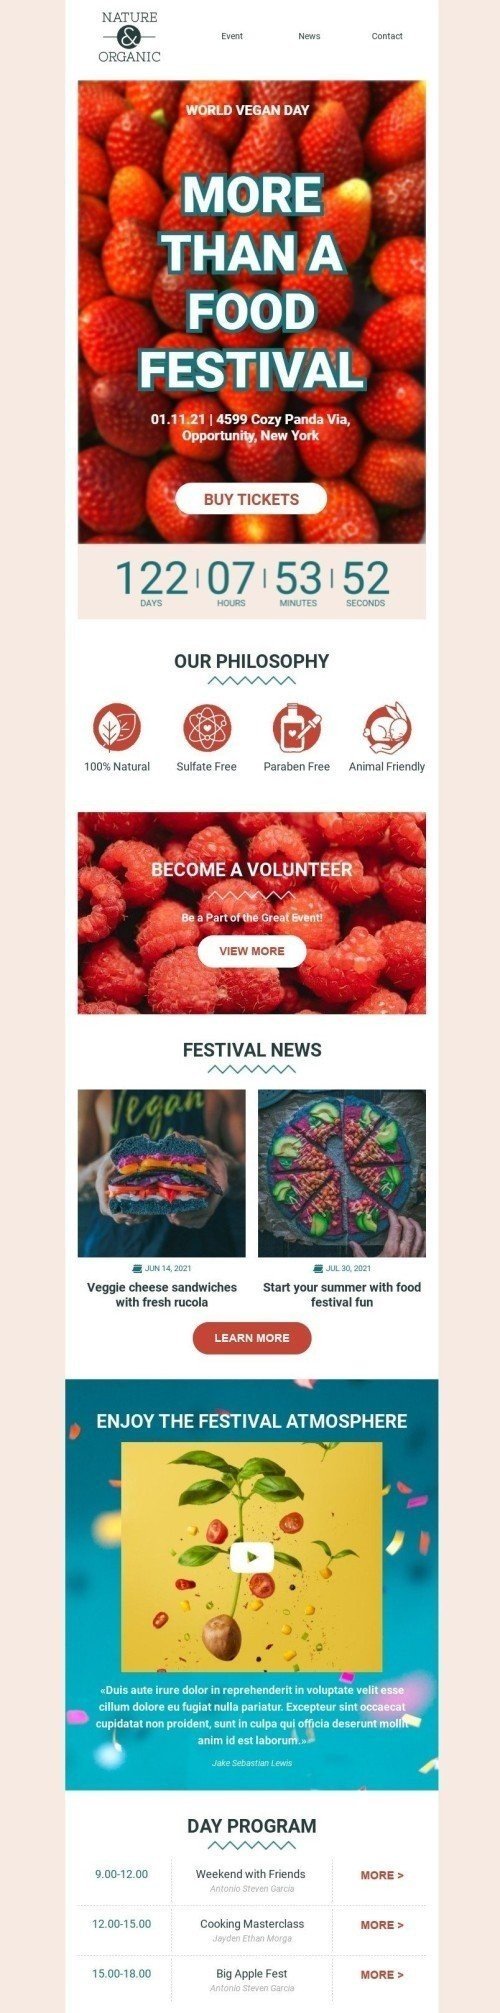 World Vegan Day Email Template «More than a food festival» for Food industry mobile view